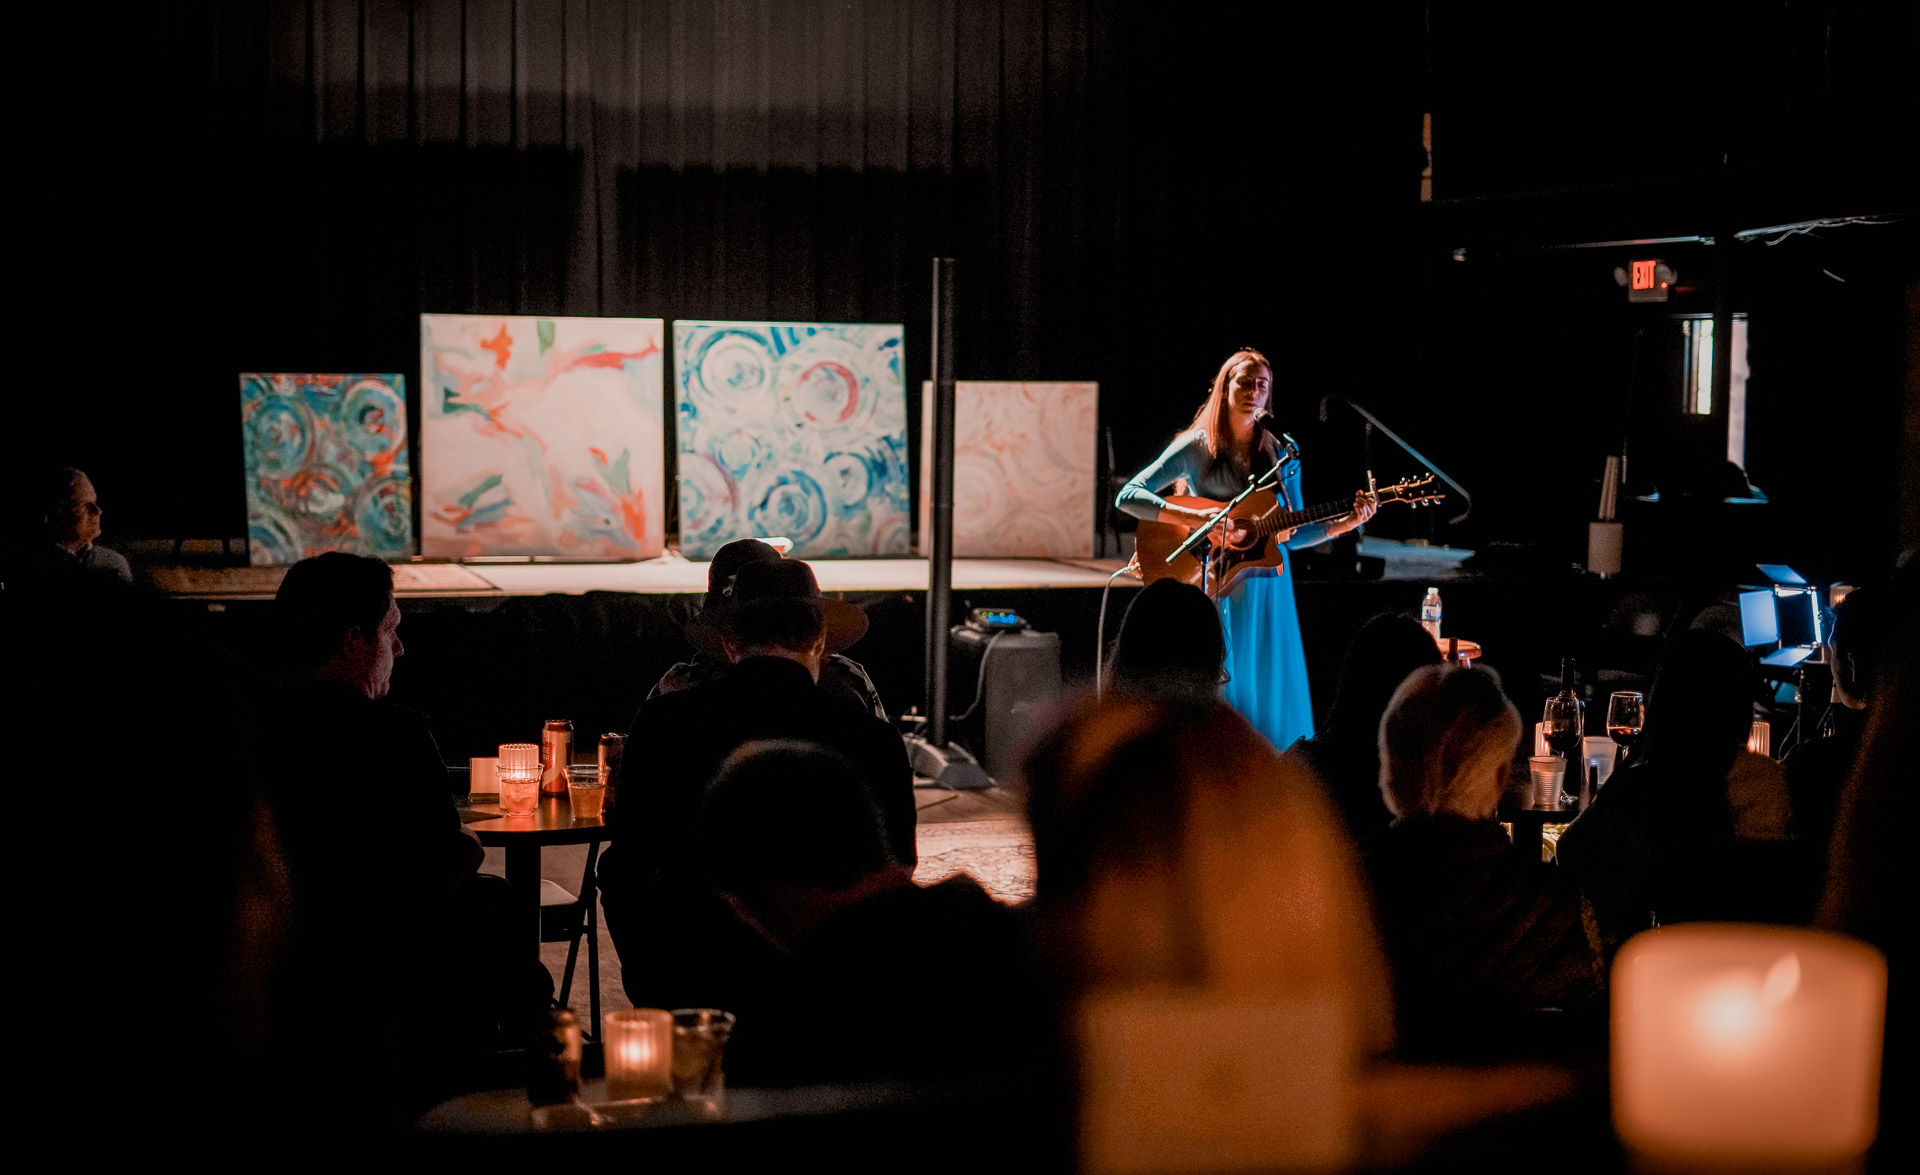 A performer singing and playing guitar in front of large canvas art pieces